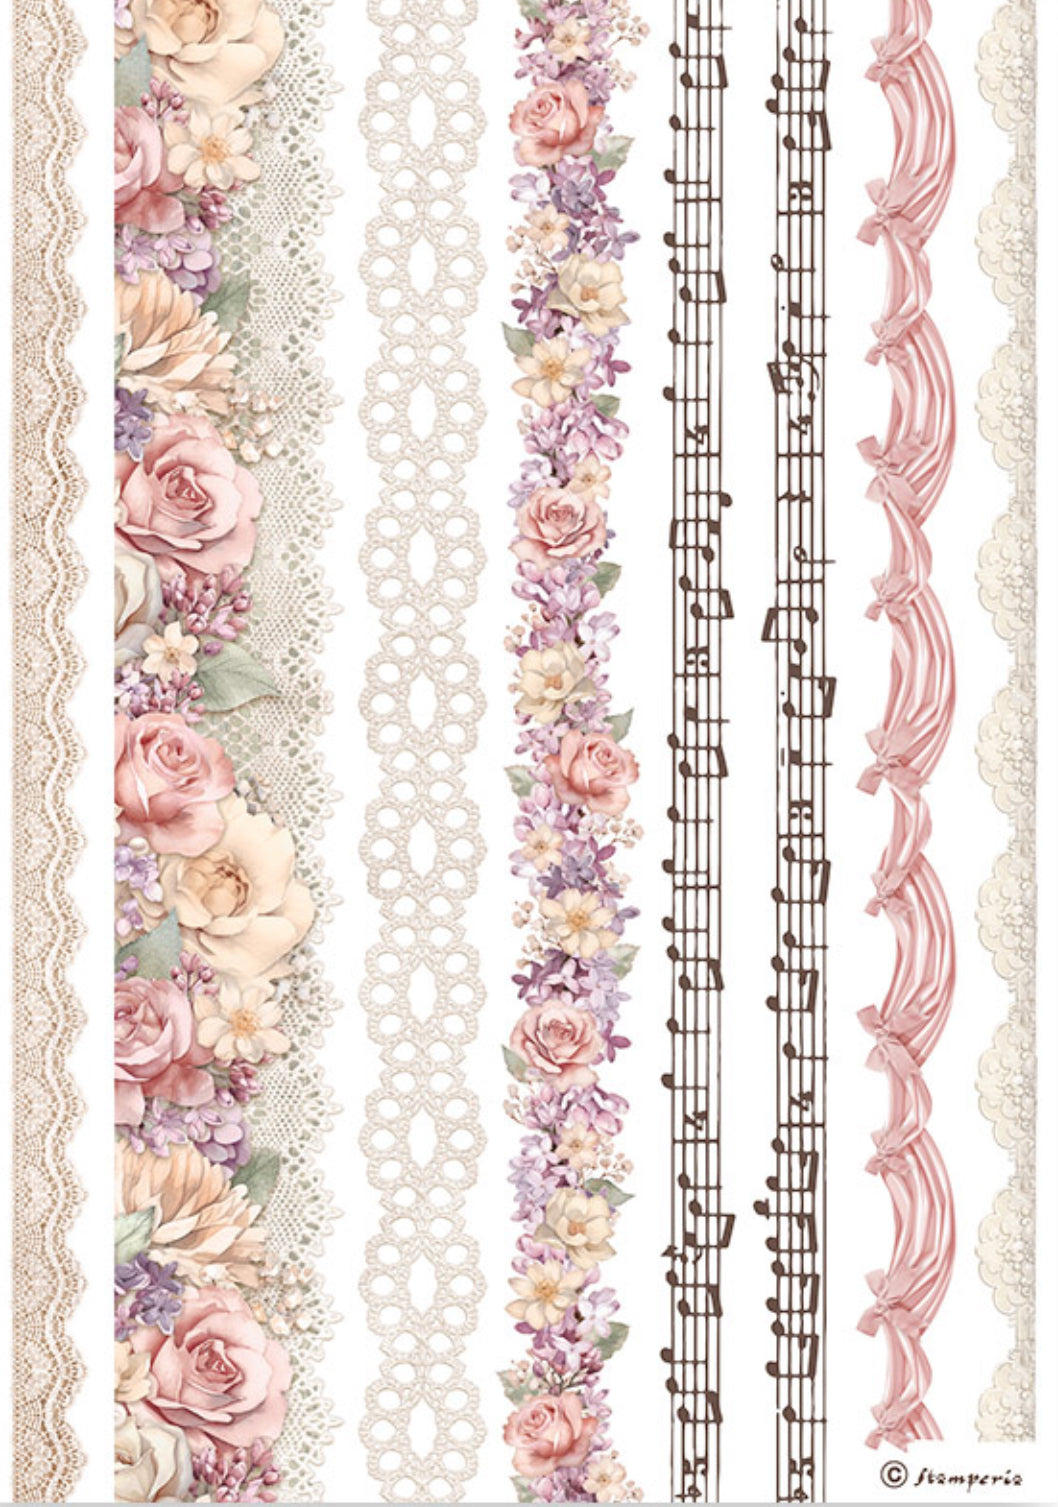 Stamperia Romance Forever Washi Pad (8 Sheets)